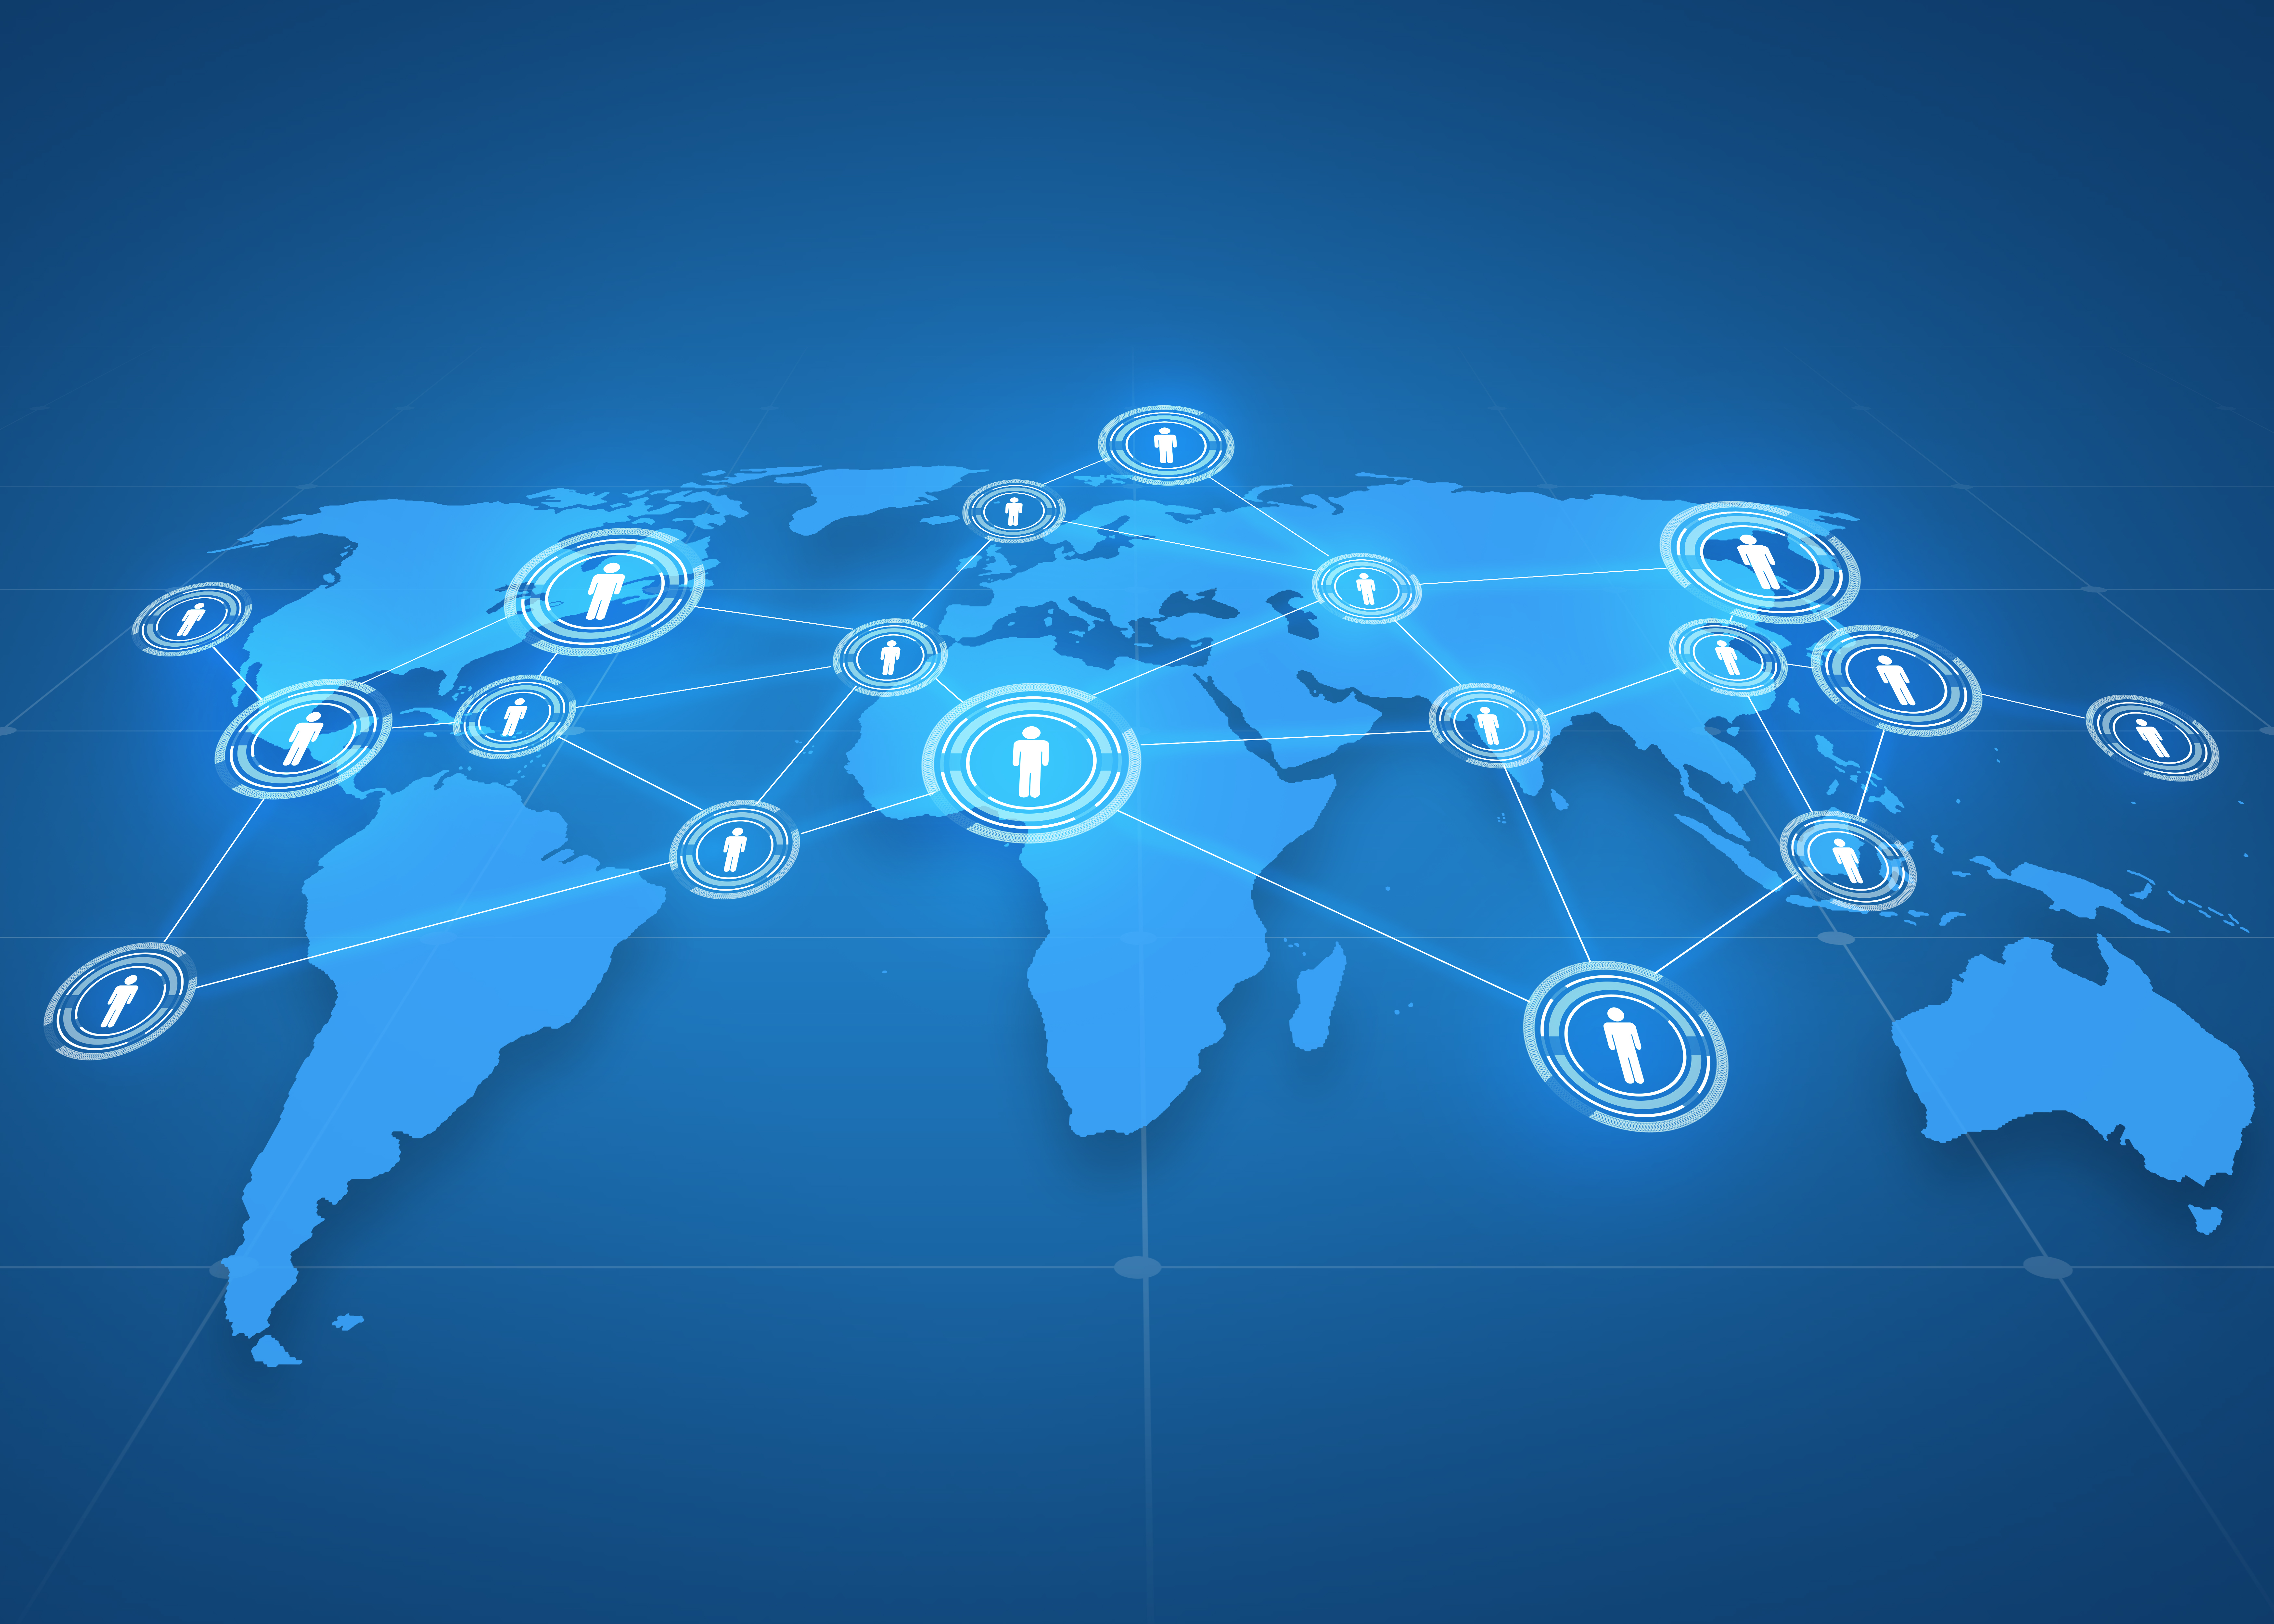 global business, social network, mass media and technology concept - world map projection with people icons over blue background